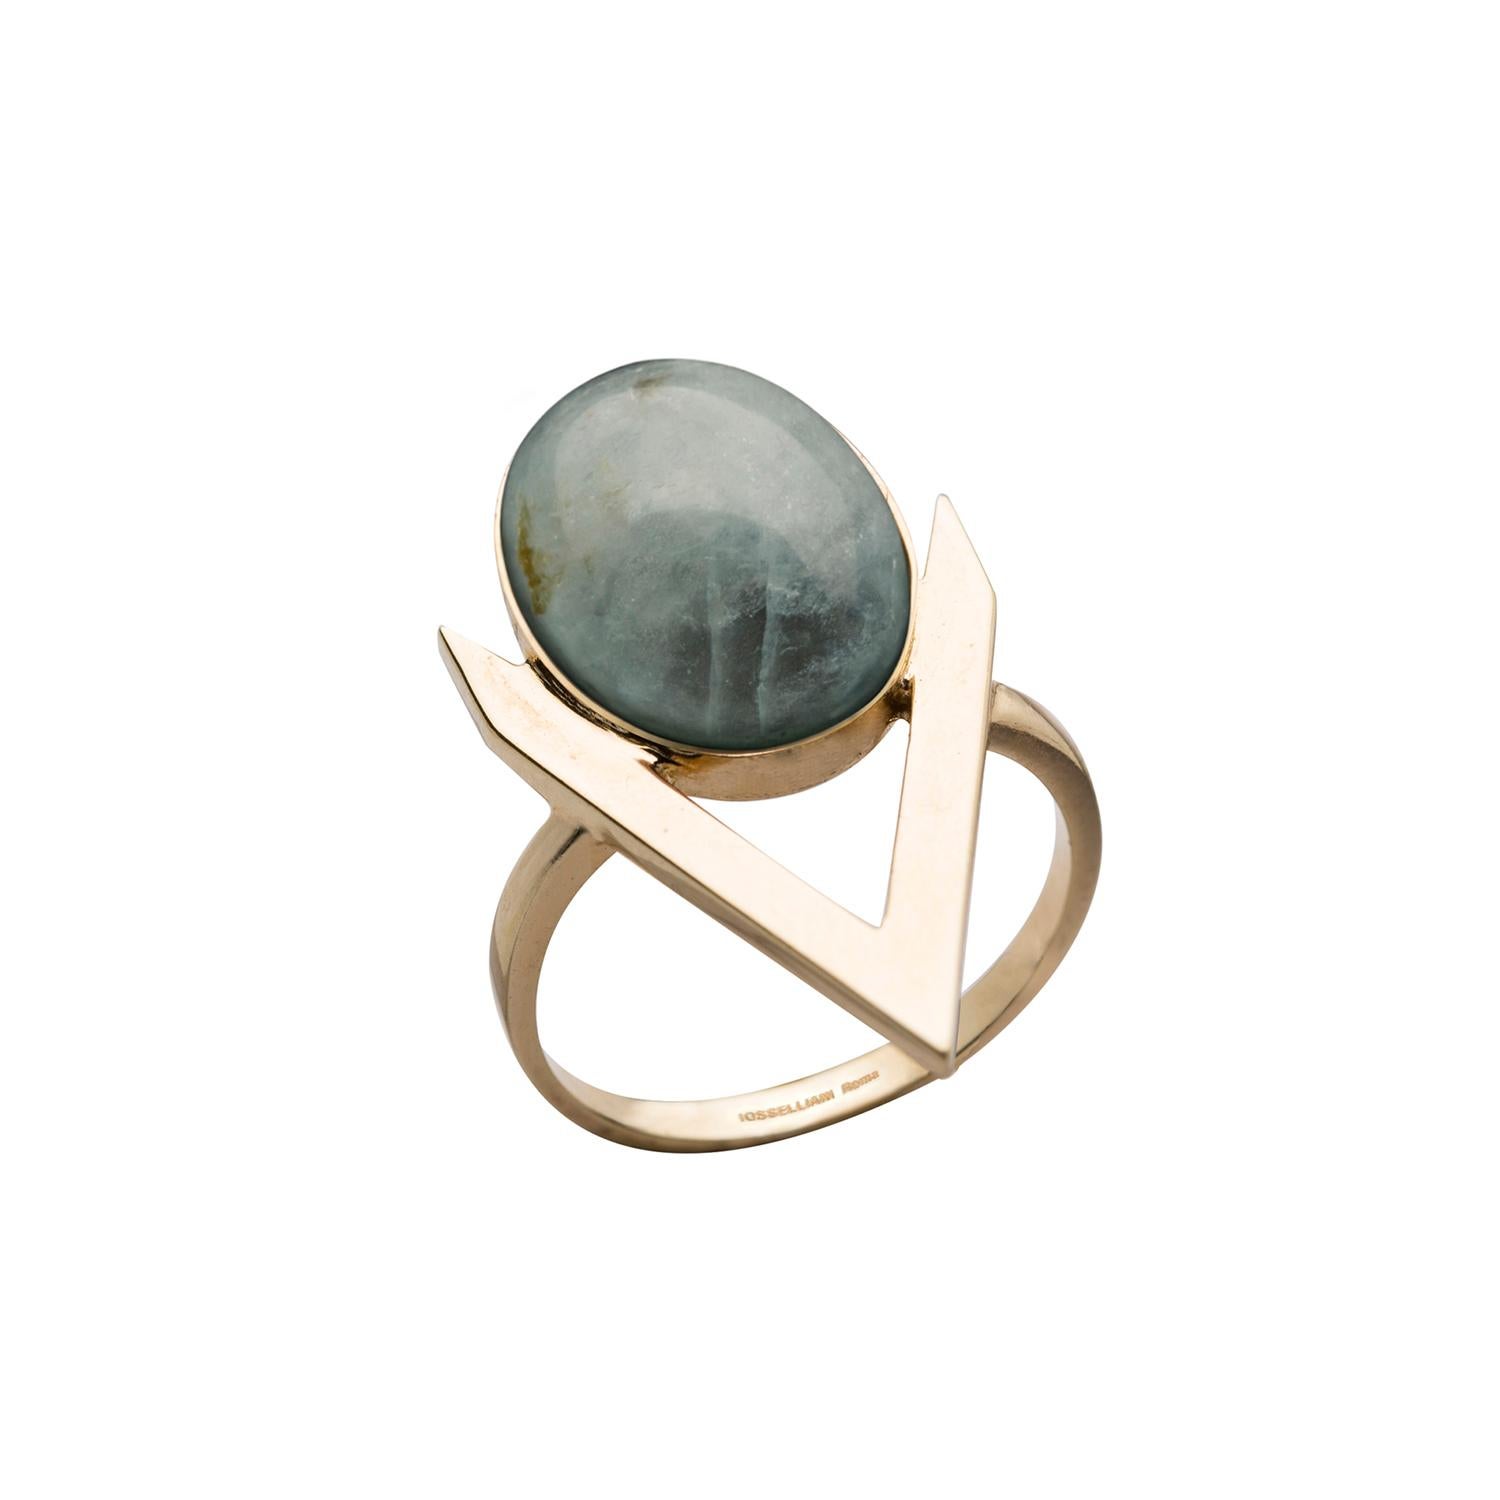 Contemporary Aquamarine Cabochon Ring in 9 Carat Gold from Iosselliani Fine For Sale